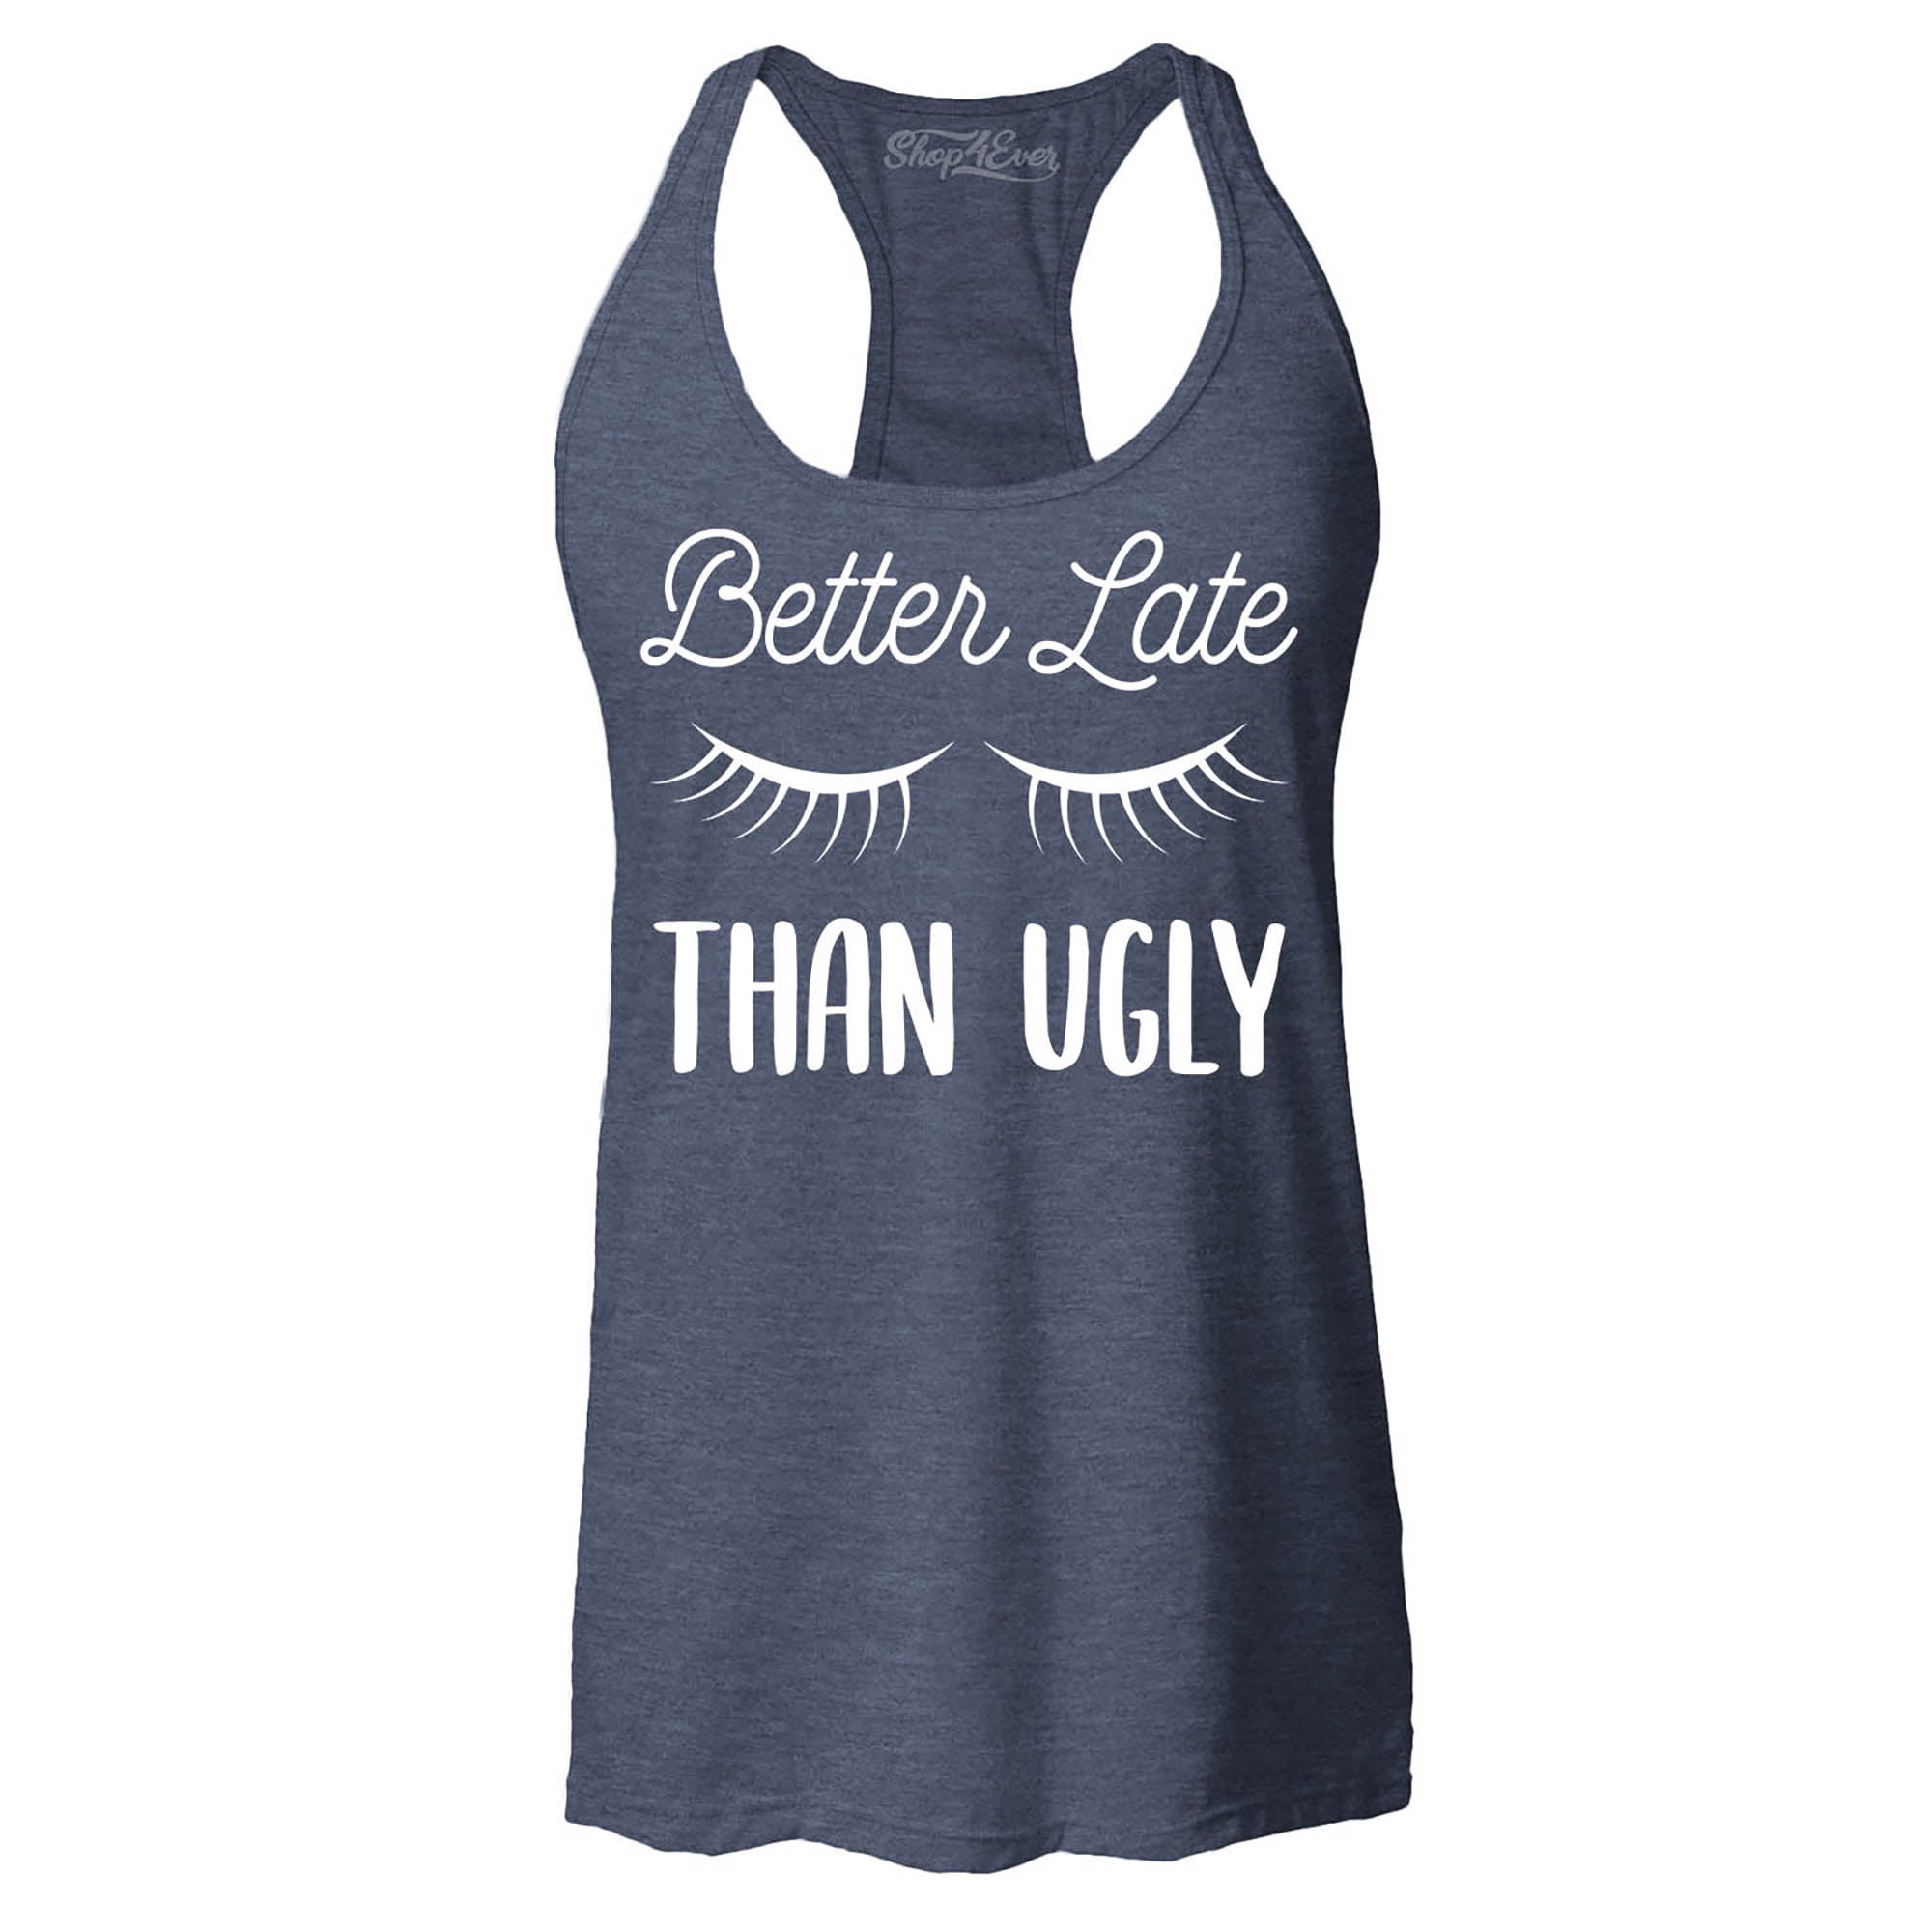 Better Late Than Ugly Women's Racerback Tank Top Slim Fit